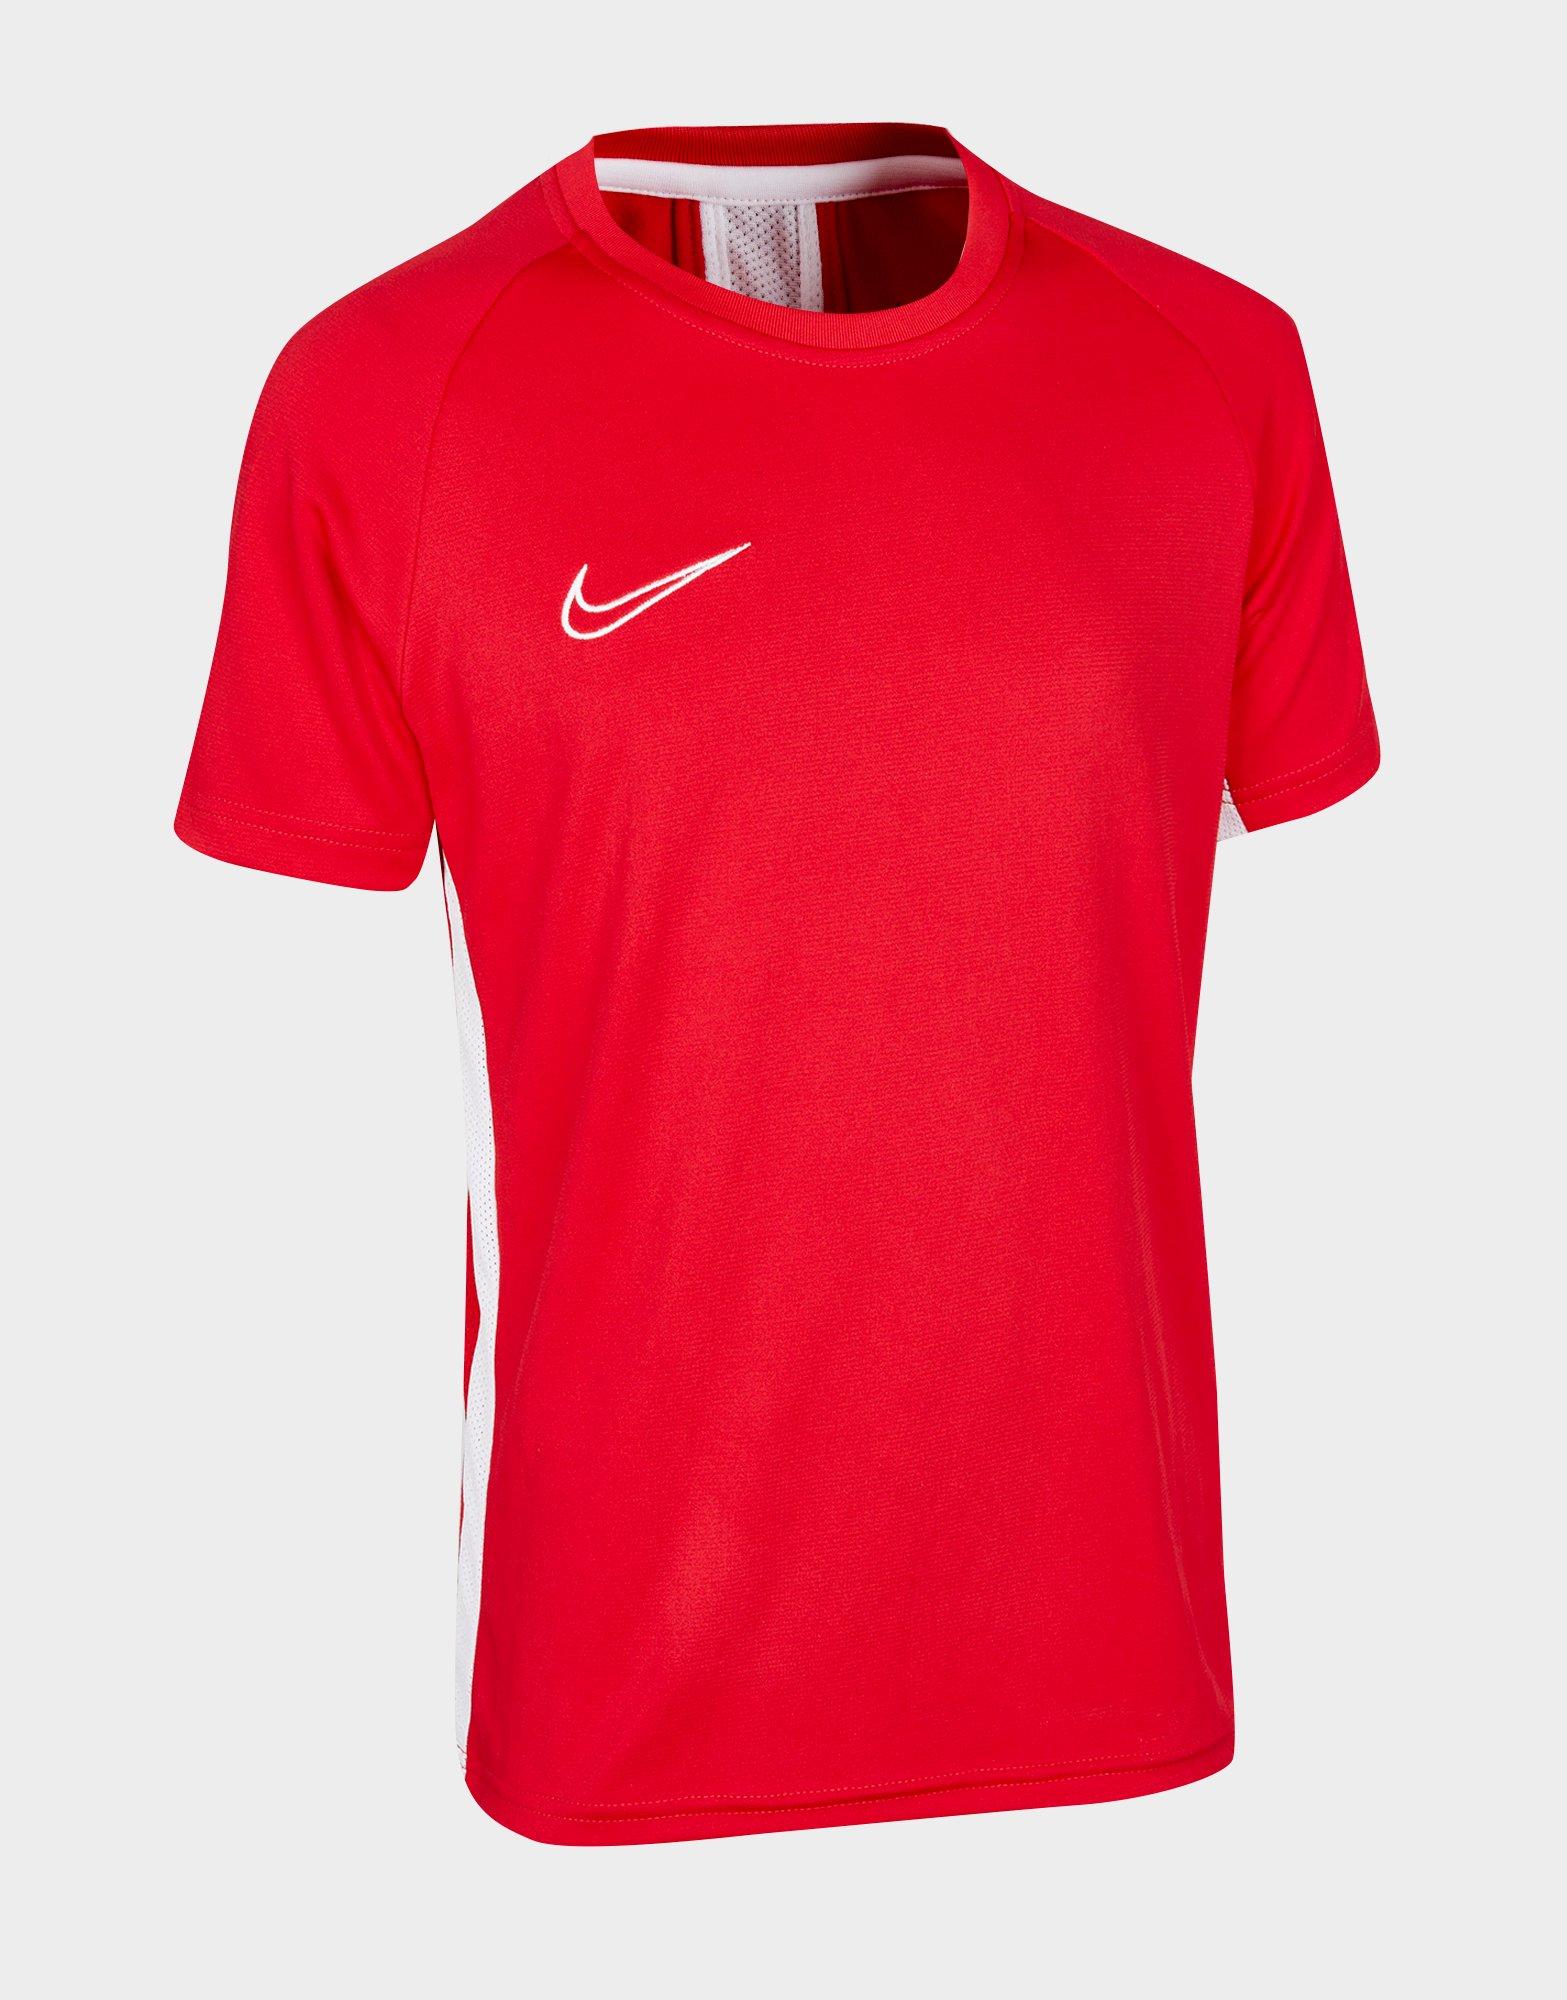 red nike top